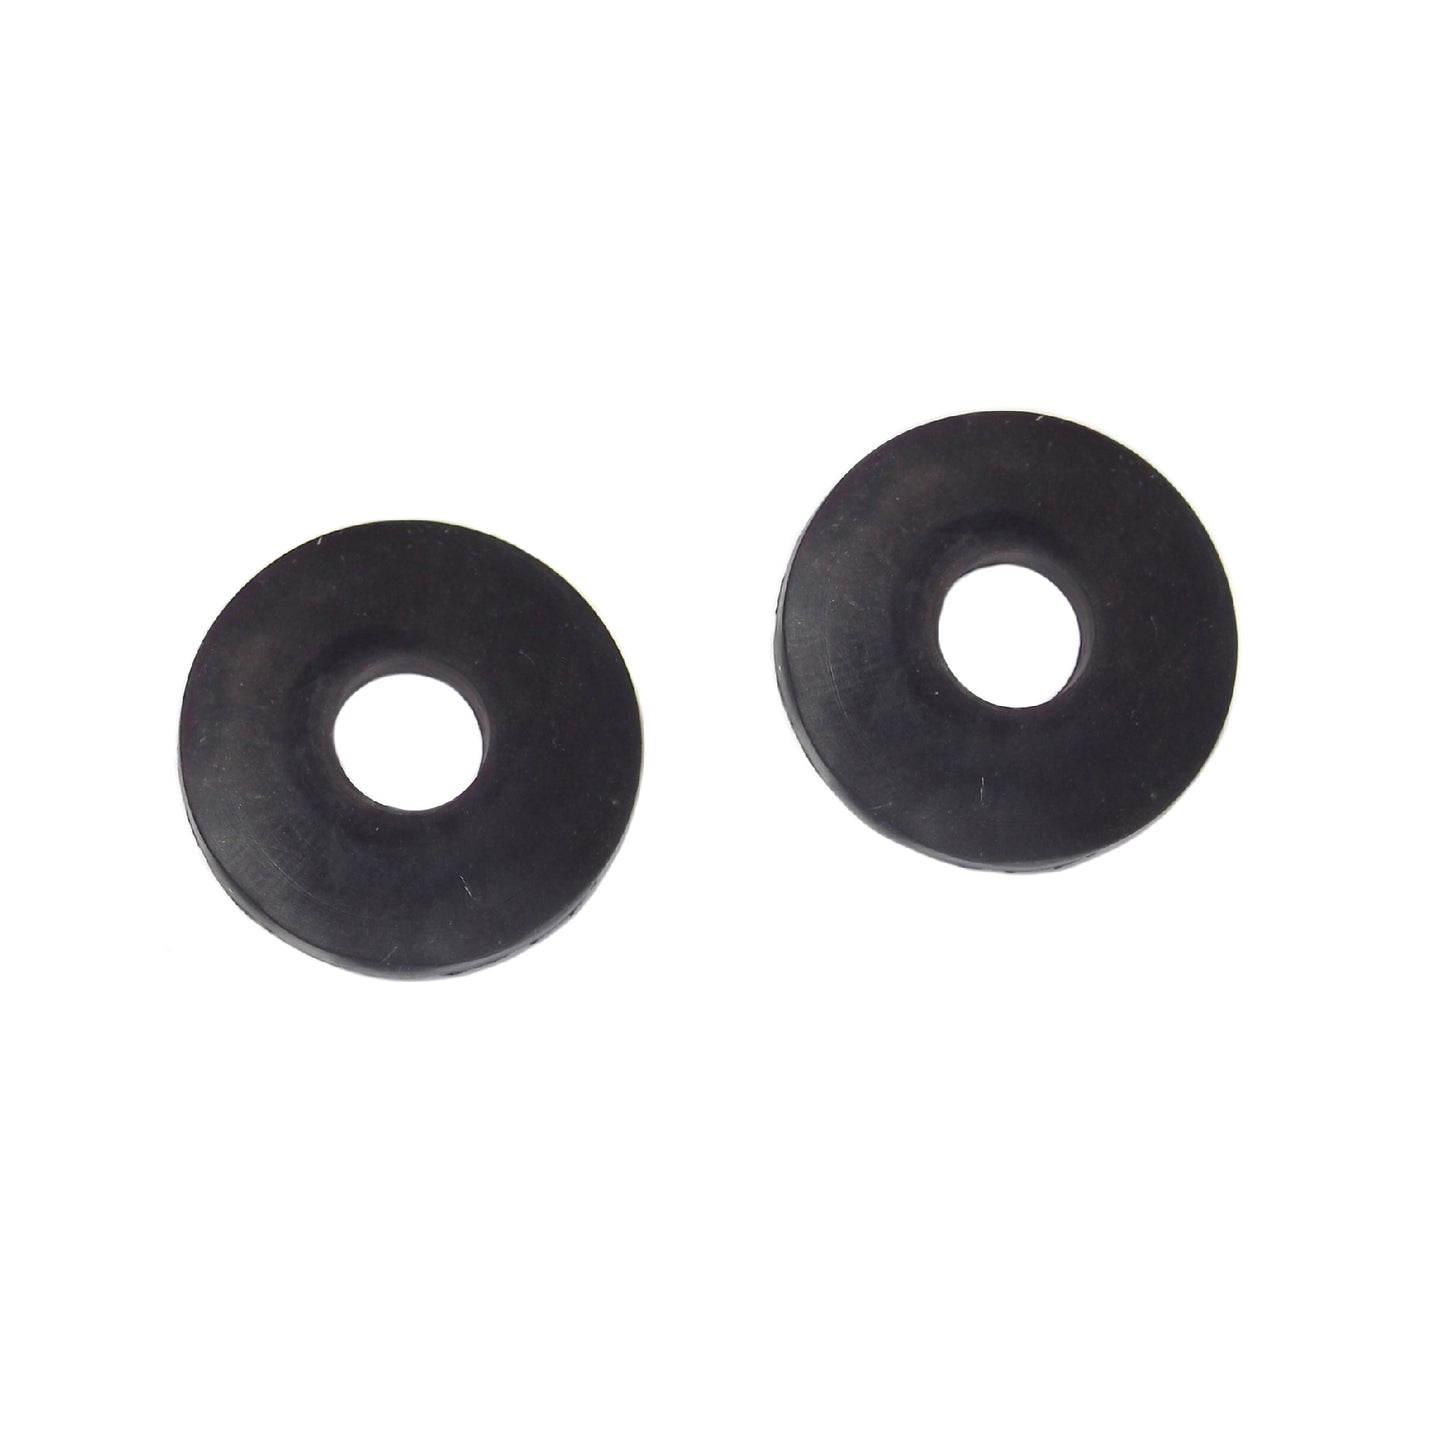 Rubber Washer for Rack Handle Assembly for FC-100 Air Circulator